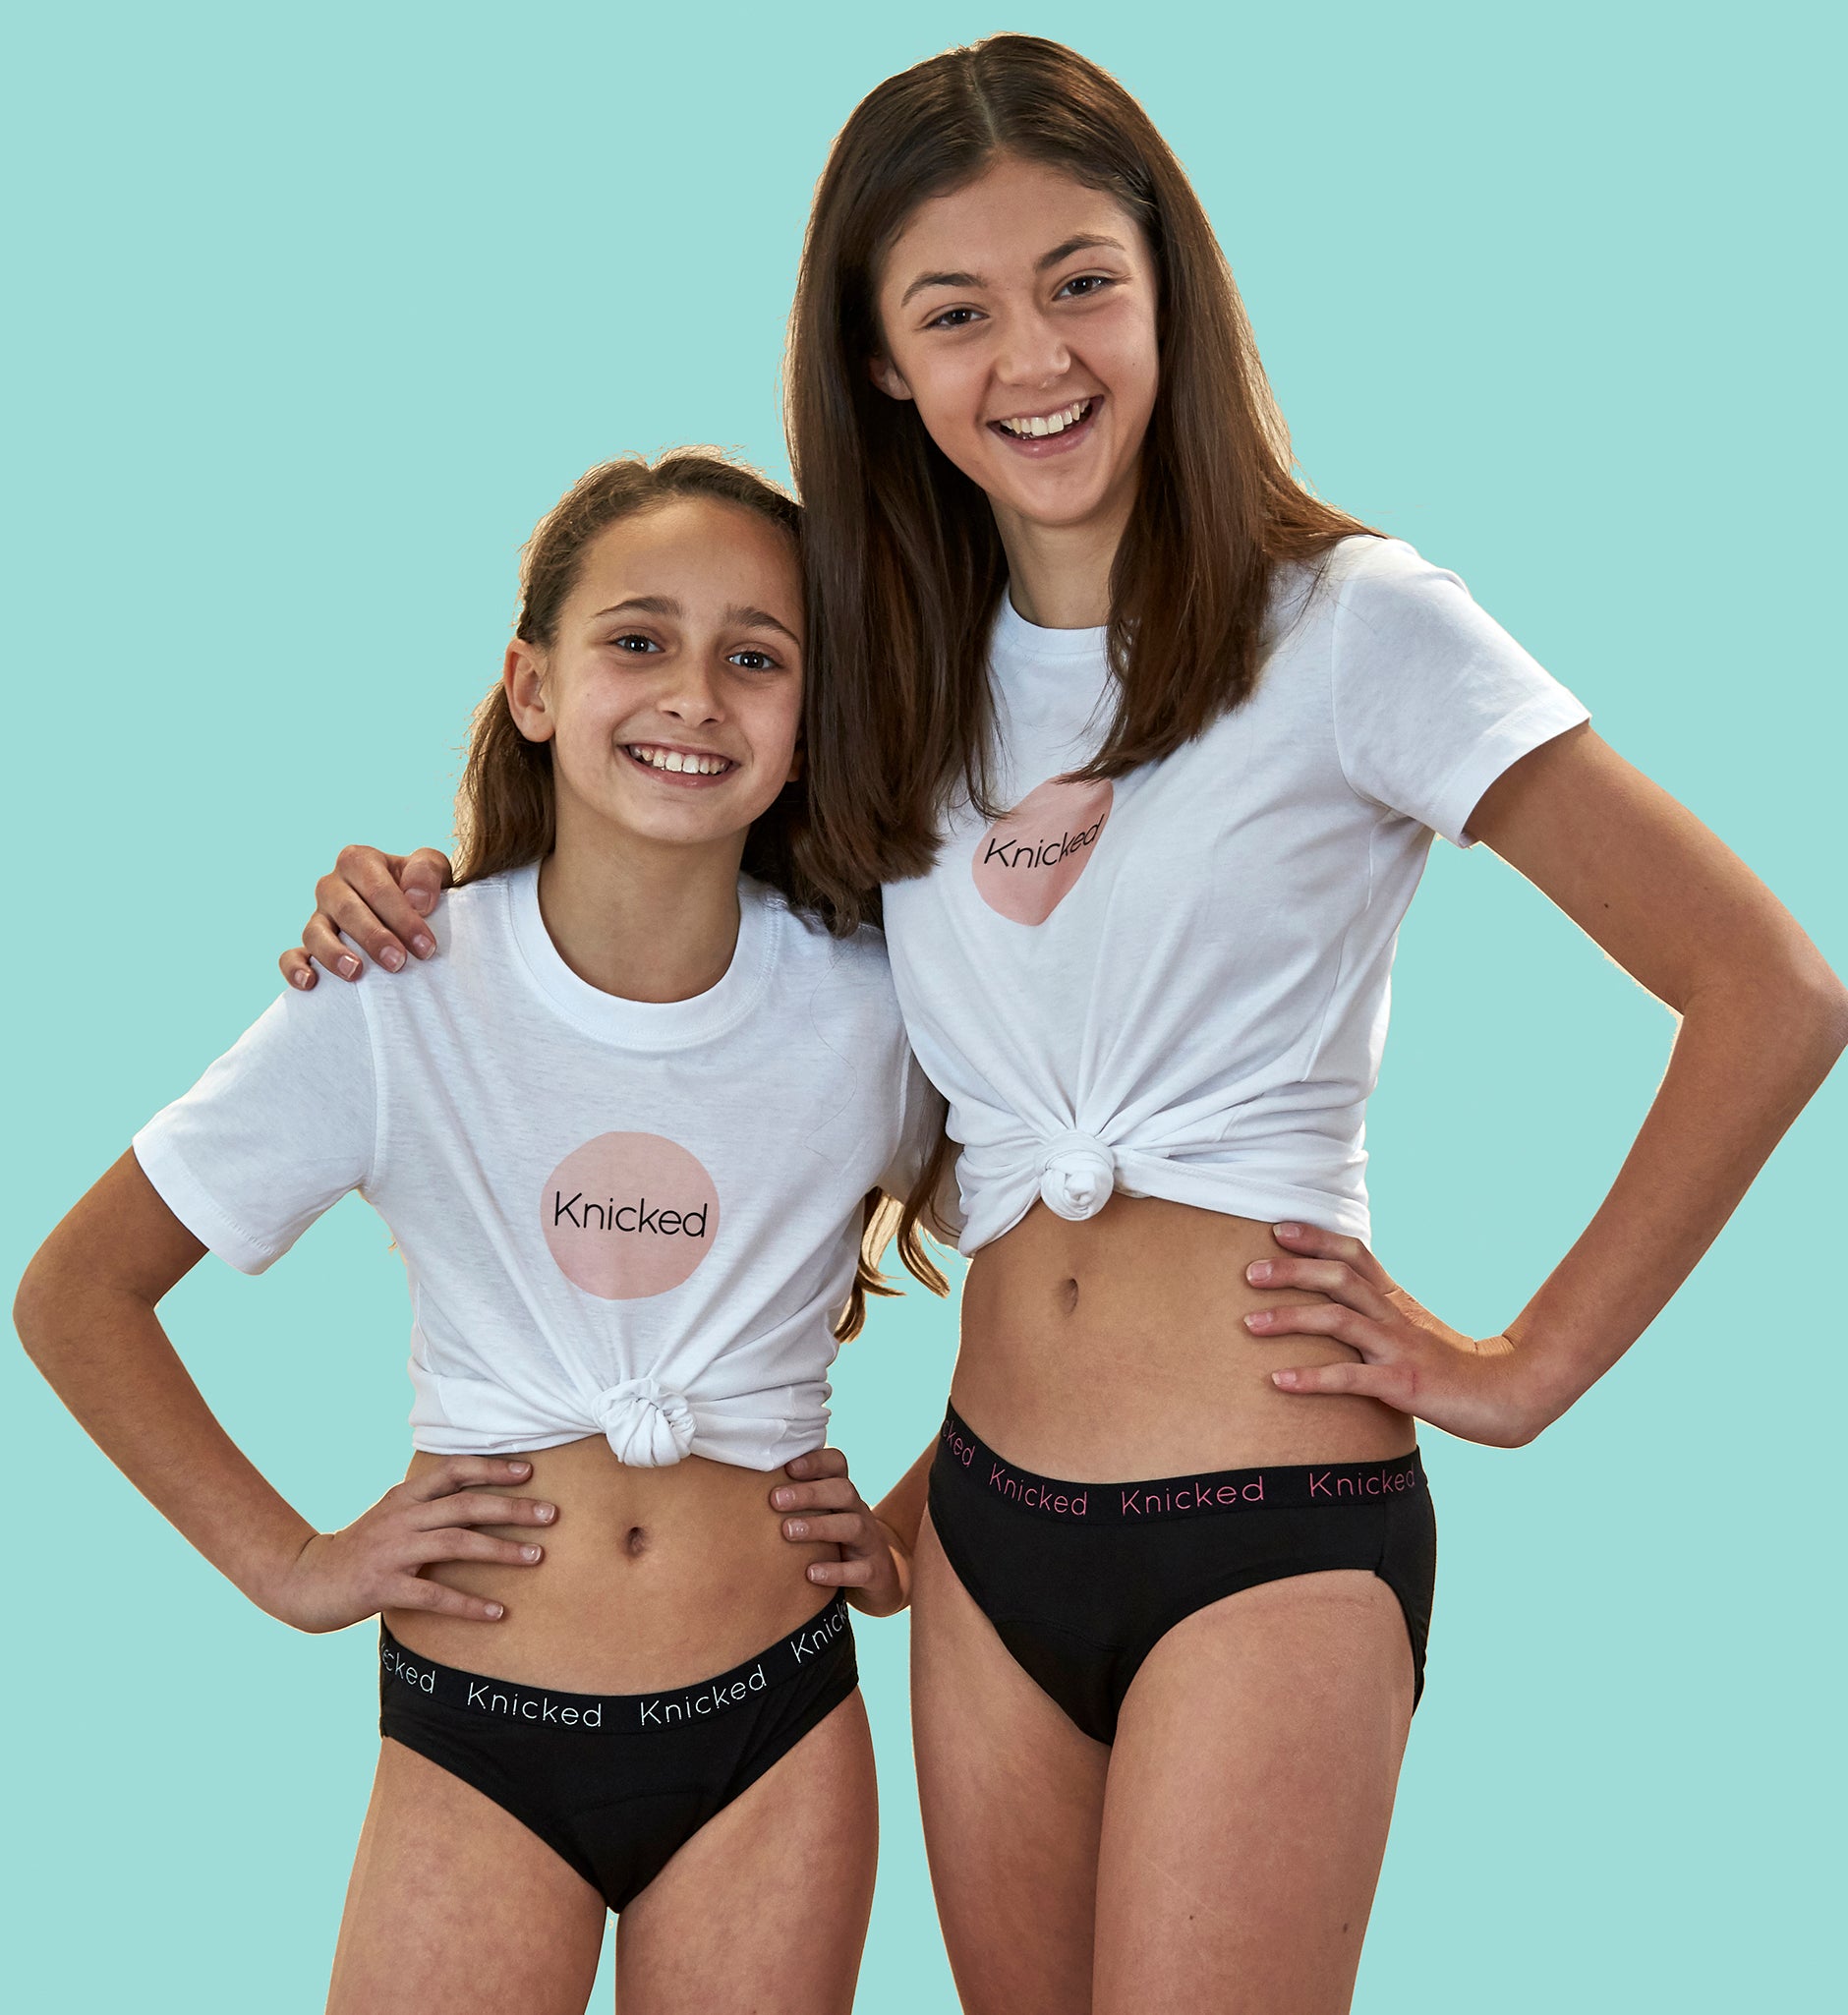 FROM PUBERTY TO PERIODS - A MUM'S GUIDE TO YOUR DAUGHTER'S FIRST PERIOD